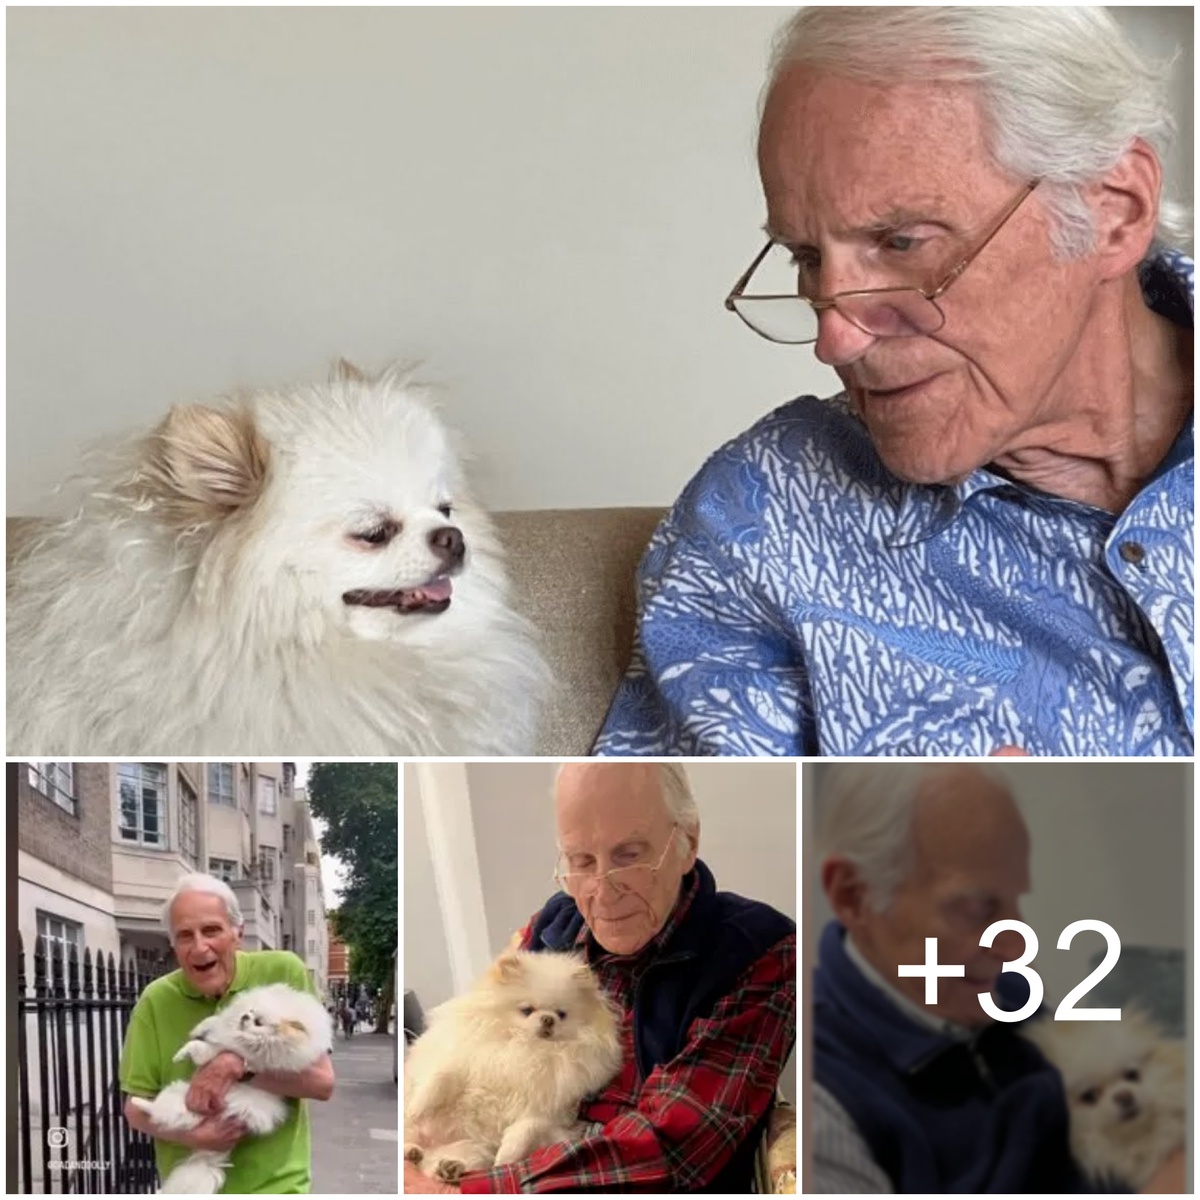 An 86-year-old father who lived a ‘lonely’ life found joy, and a soulmate is going viral on TikTok after his daughter gave him a Pomeranian.